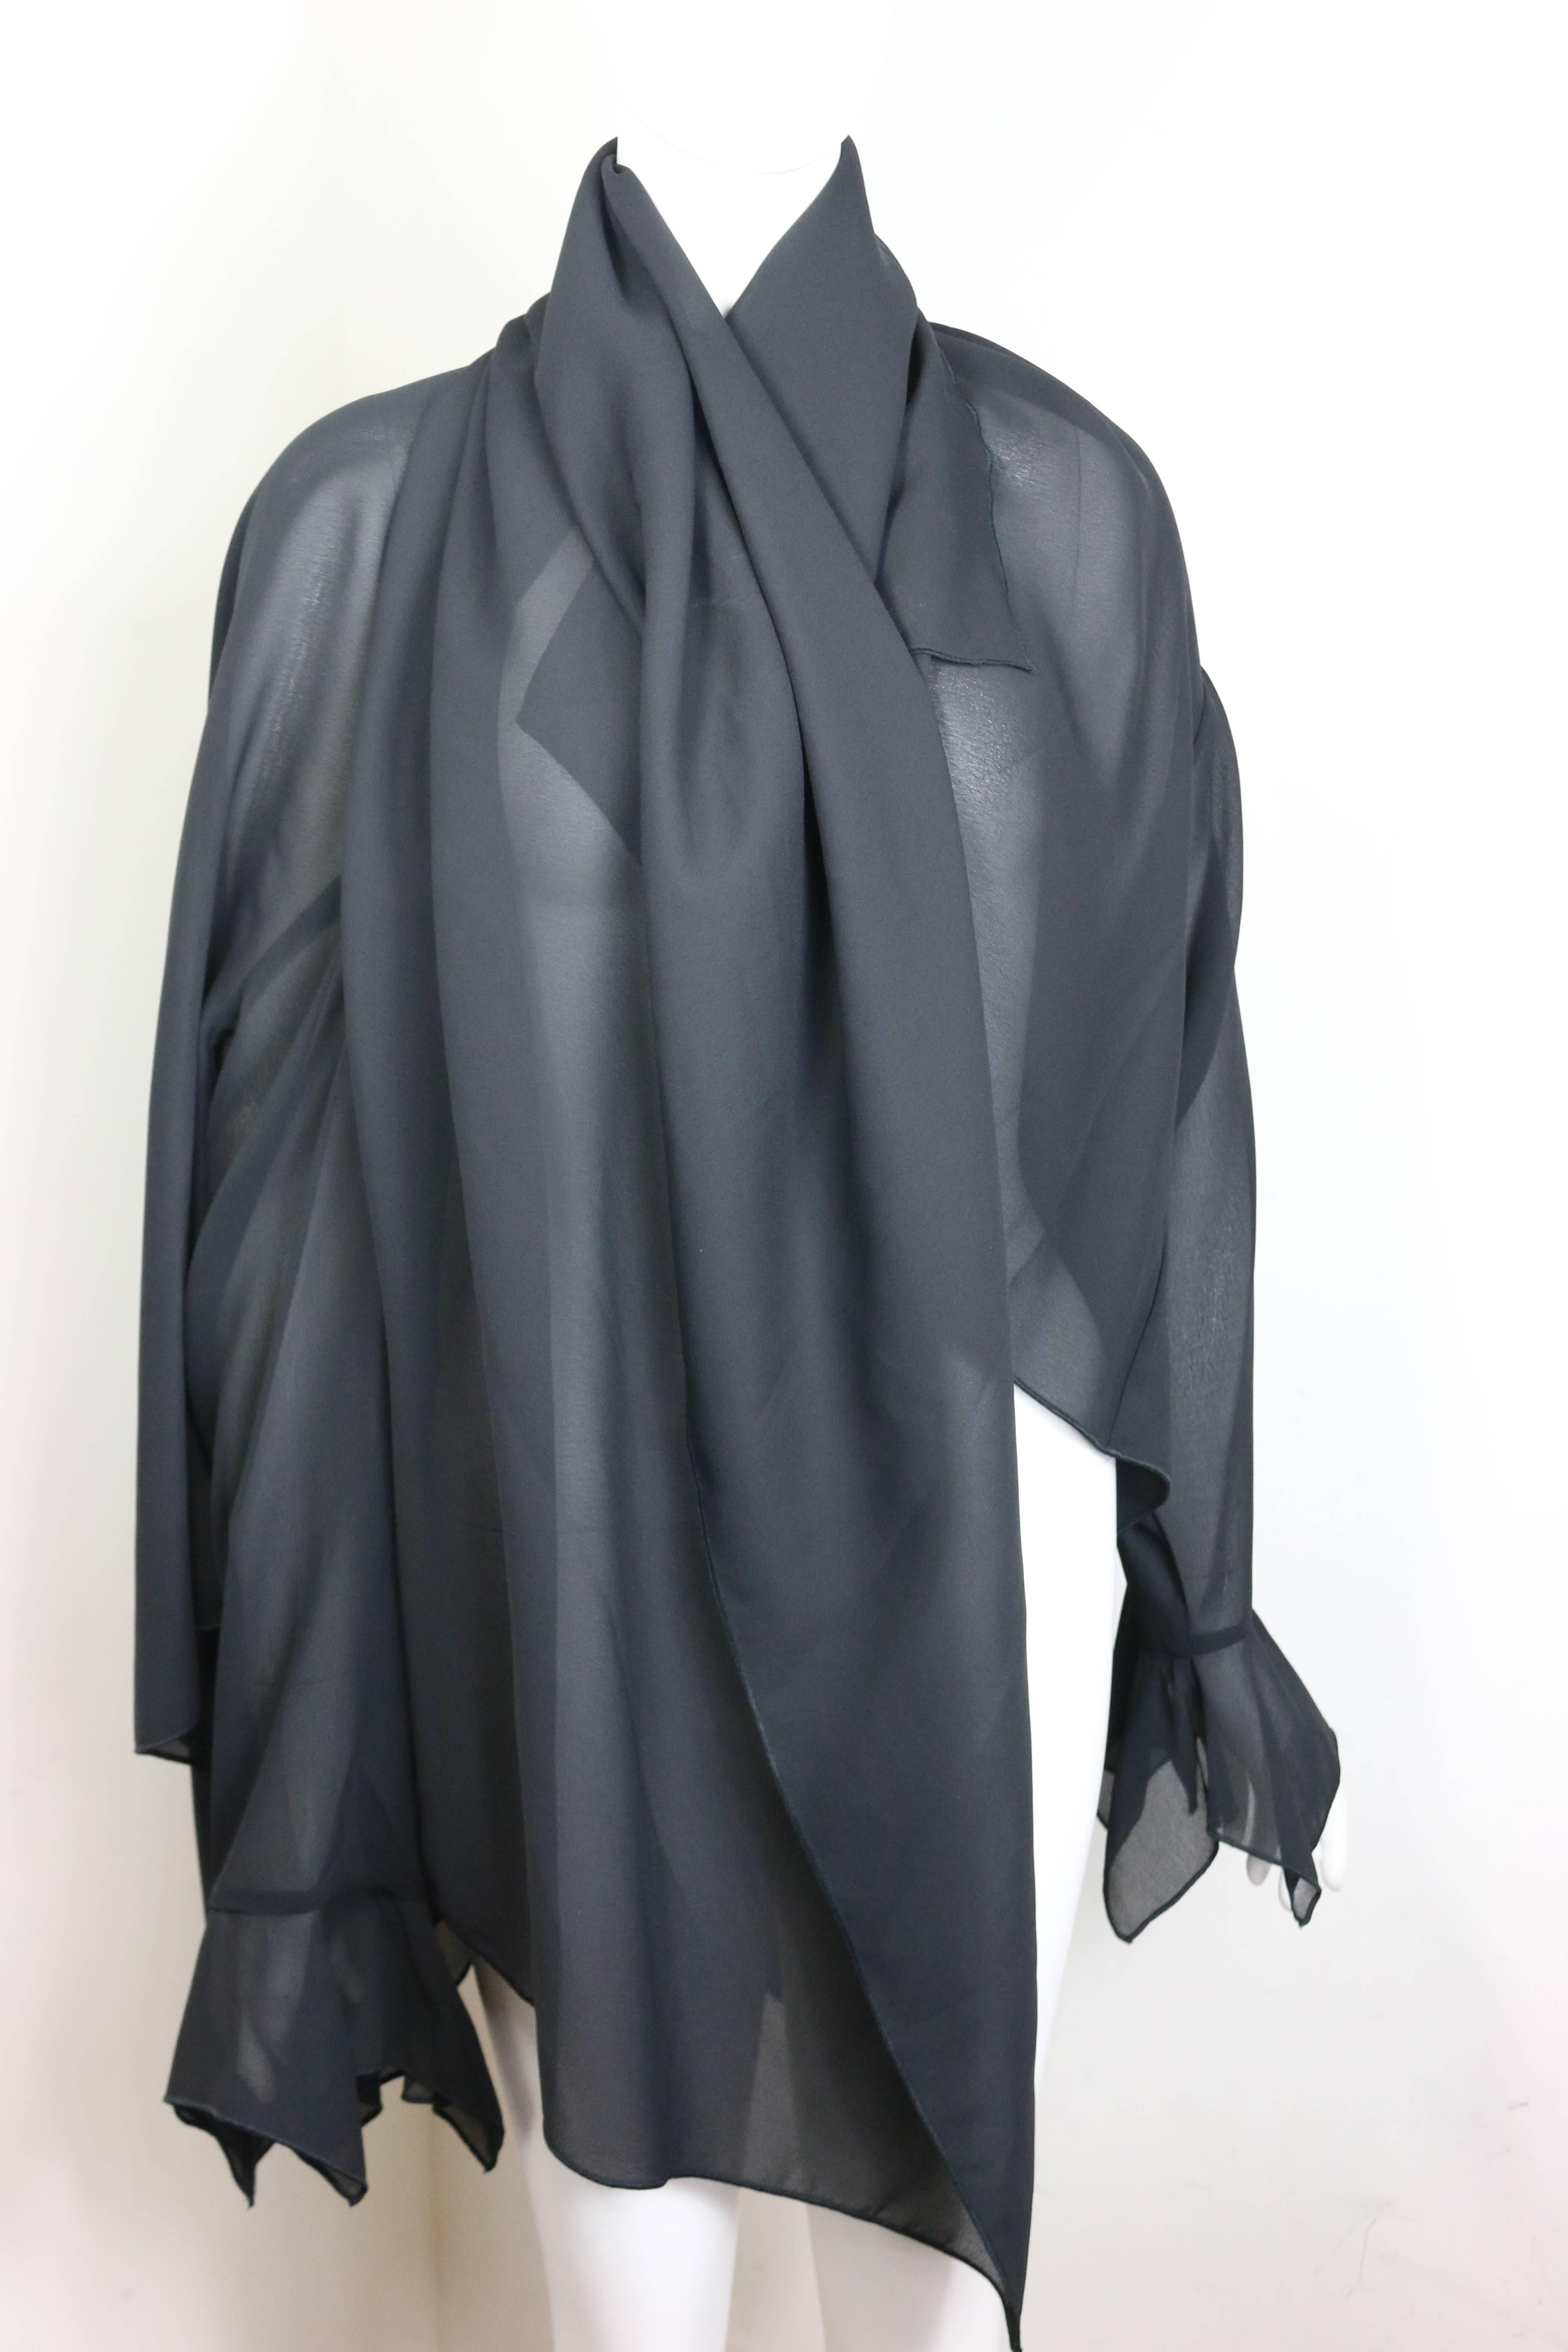 - Vintage 90s Ikons black polyester cape jacket with sleeves. Featuring a silver hardware button around the neck fastening. This beautiful layer shape cape jacket is unique and you can wear it in many ways. One of a kind!

- Made in Italy. 

- Size